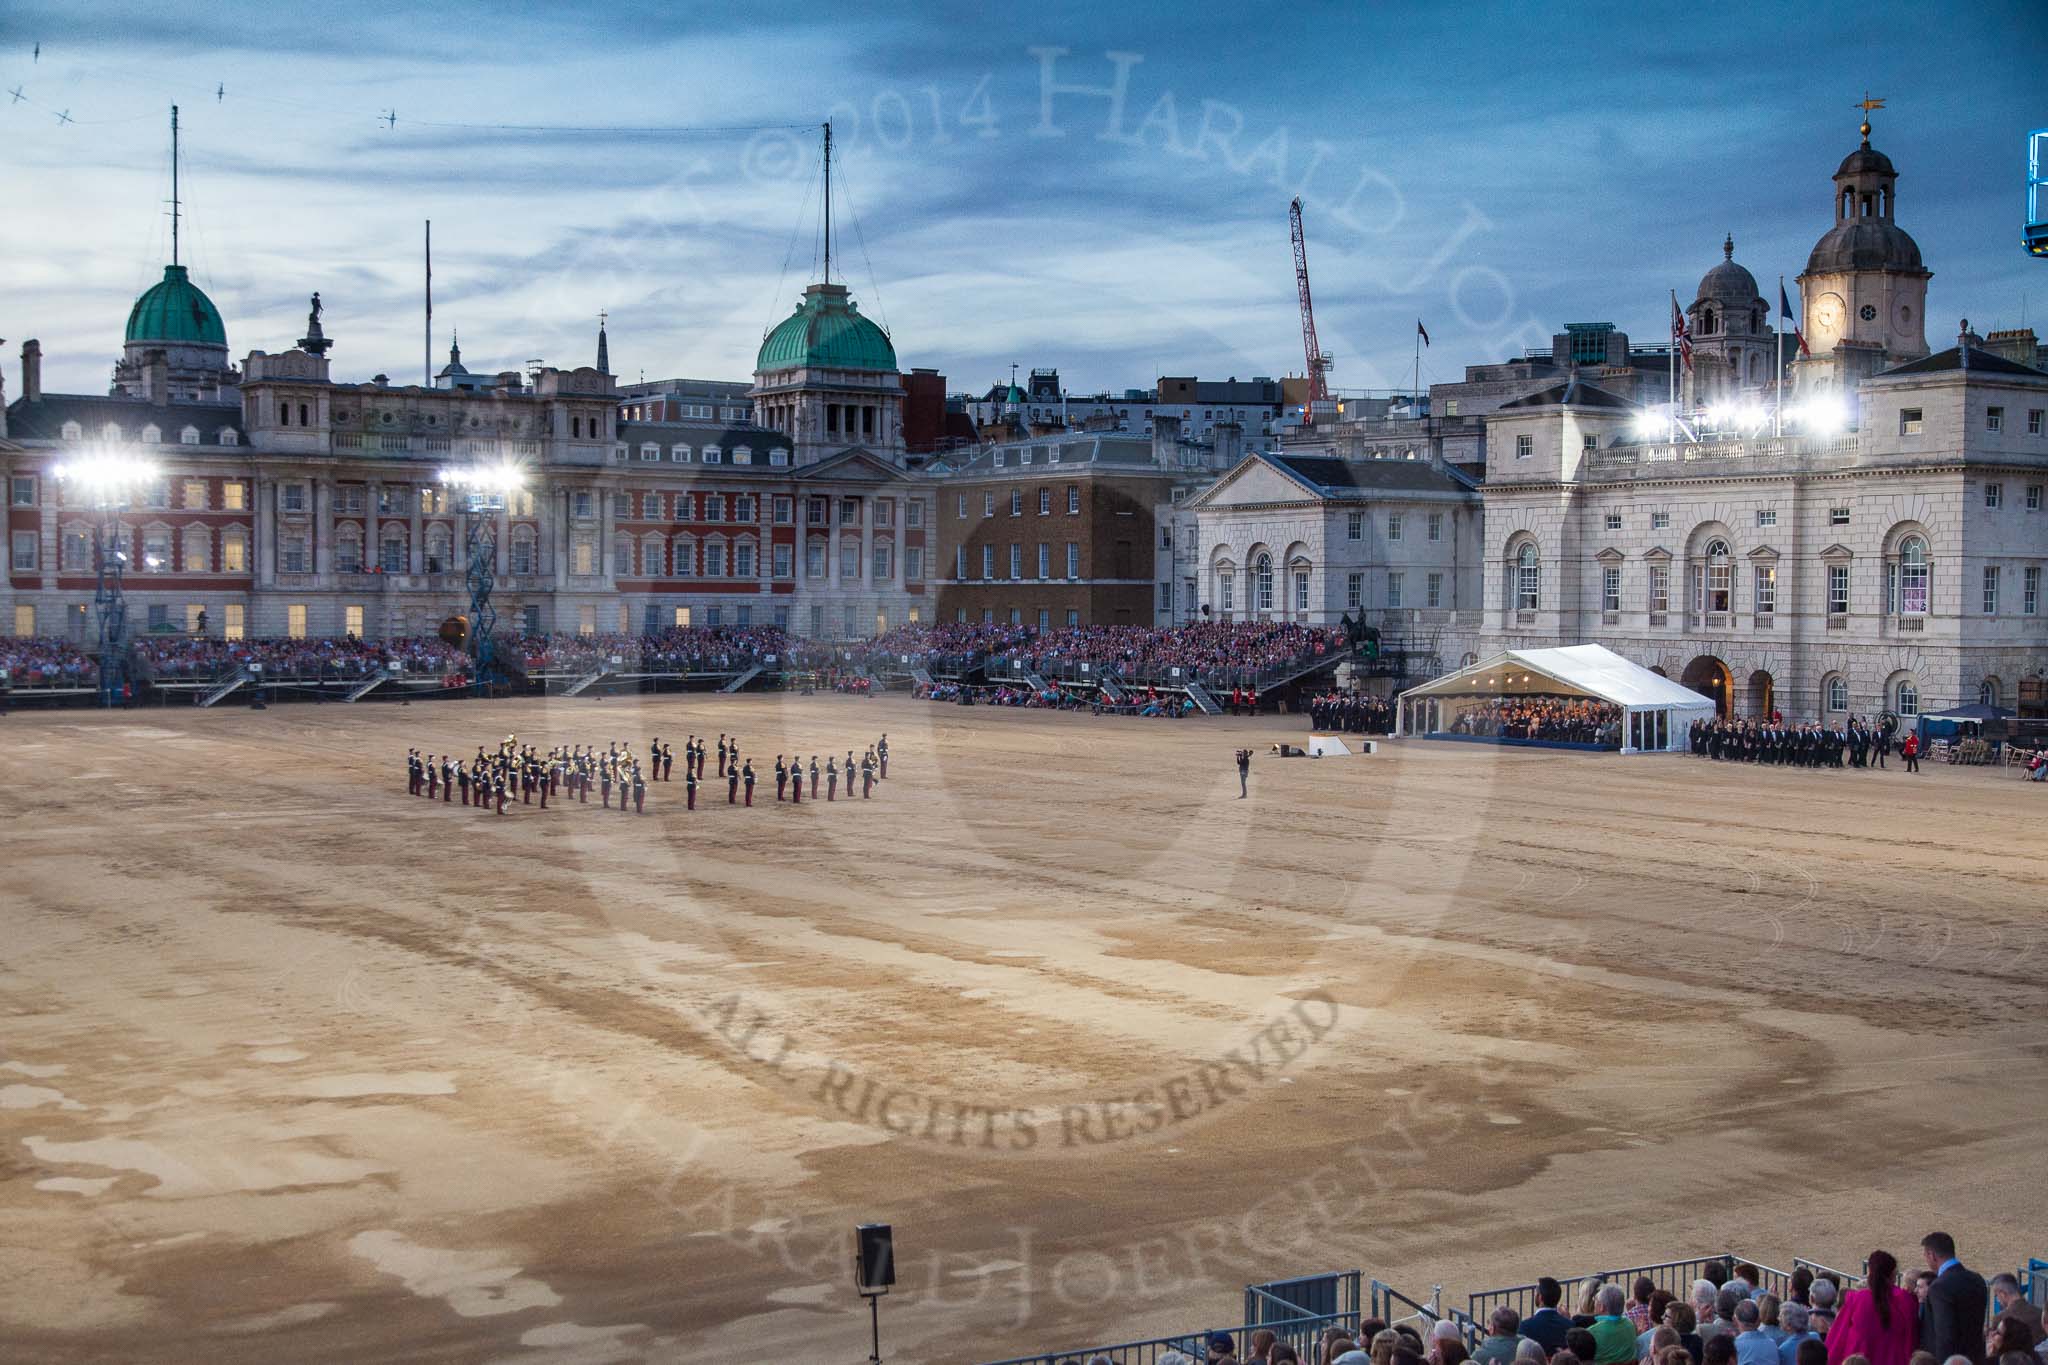 Beating Retreat 2014.
Horse Guards Parade, Westminster,
London SW1A,

United Kingdom,
on 11 June 2014 at 21:25, image #325